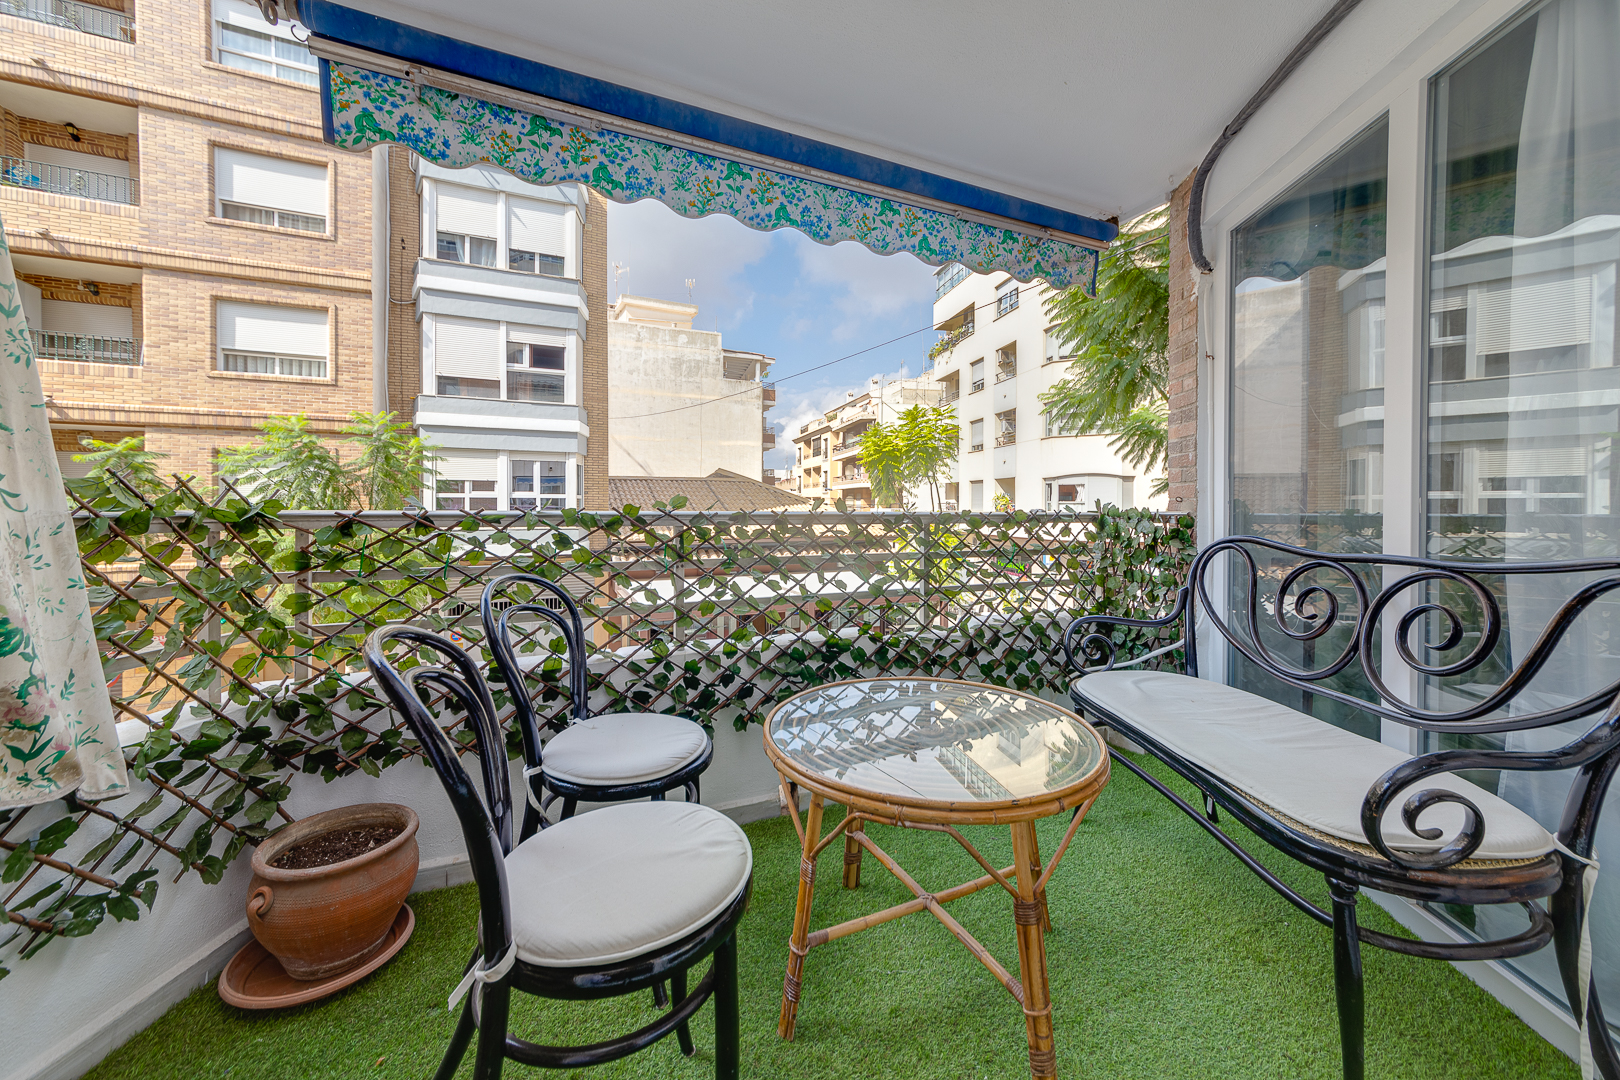 Luxurious renovated apartment for sale in the center of Torrevieja near the harbour, beaches and promenade.